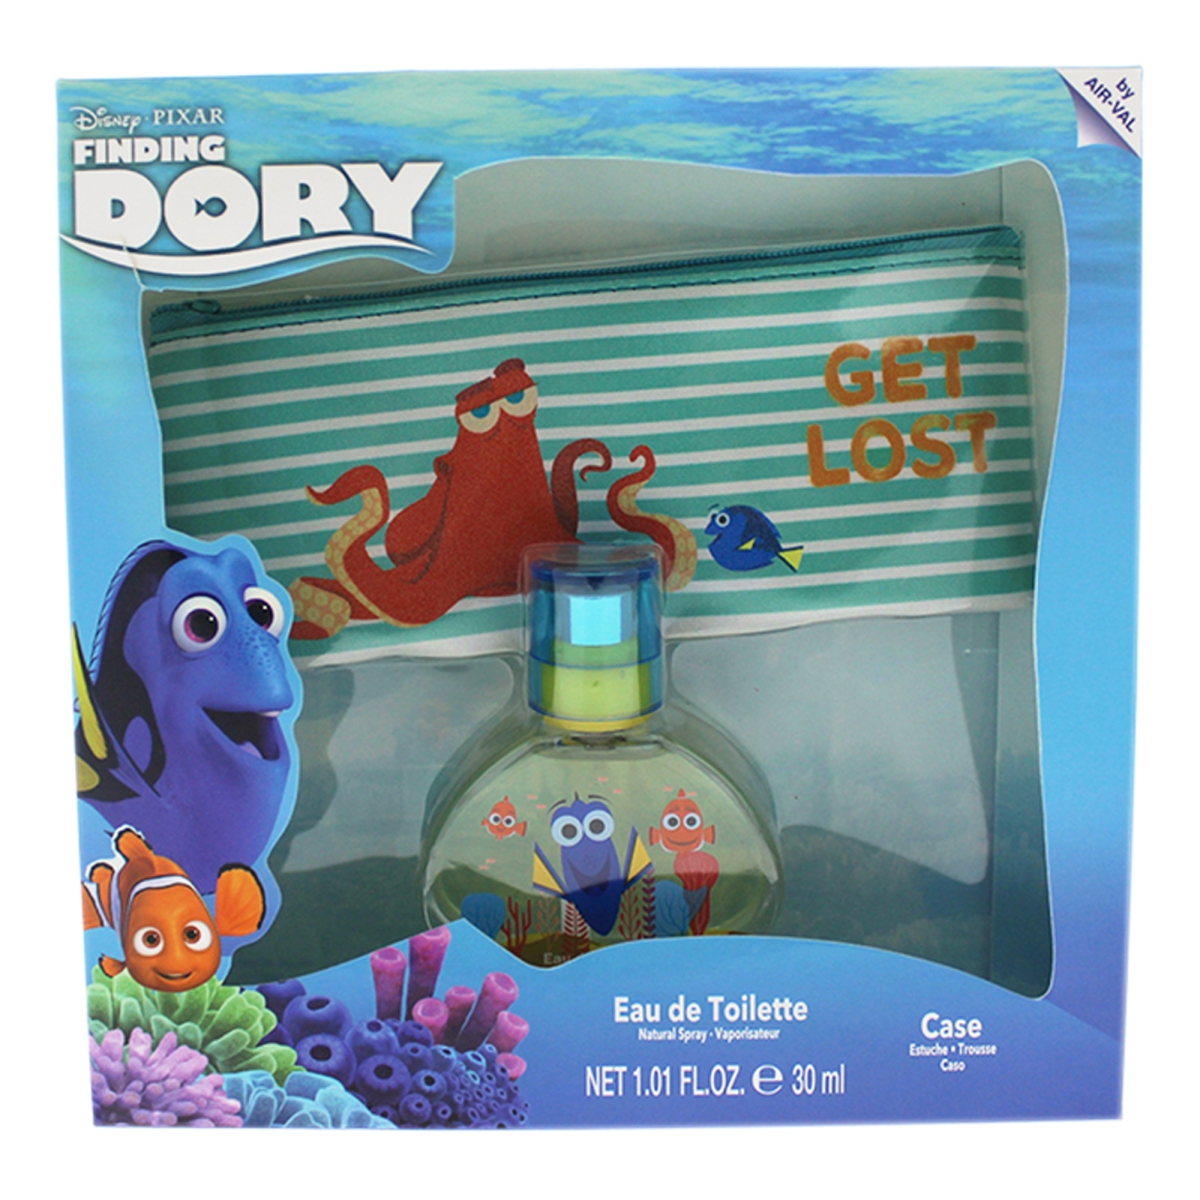 K-gs-2000 2 Piece Finding Dory Gift Set For Kids